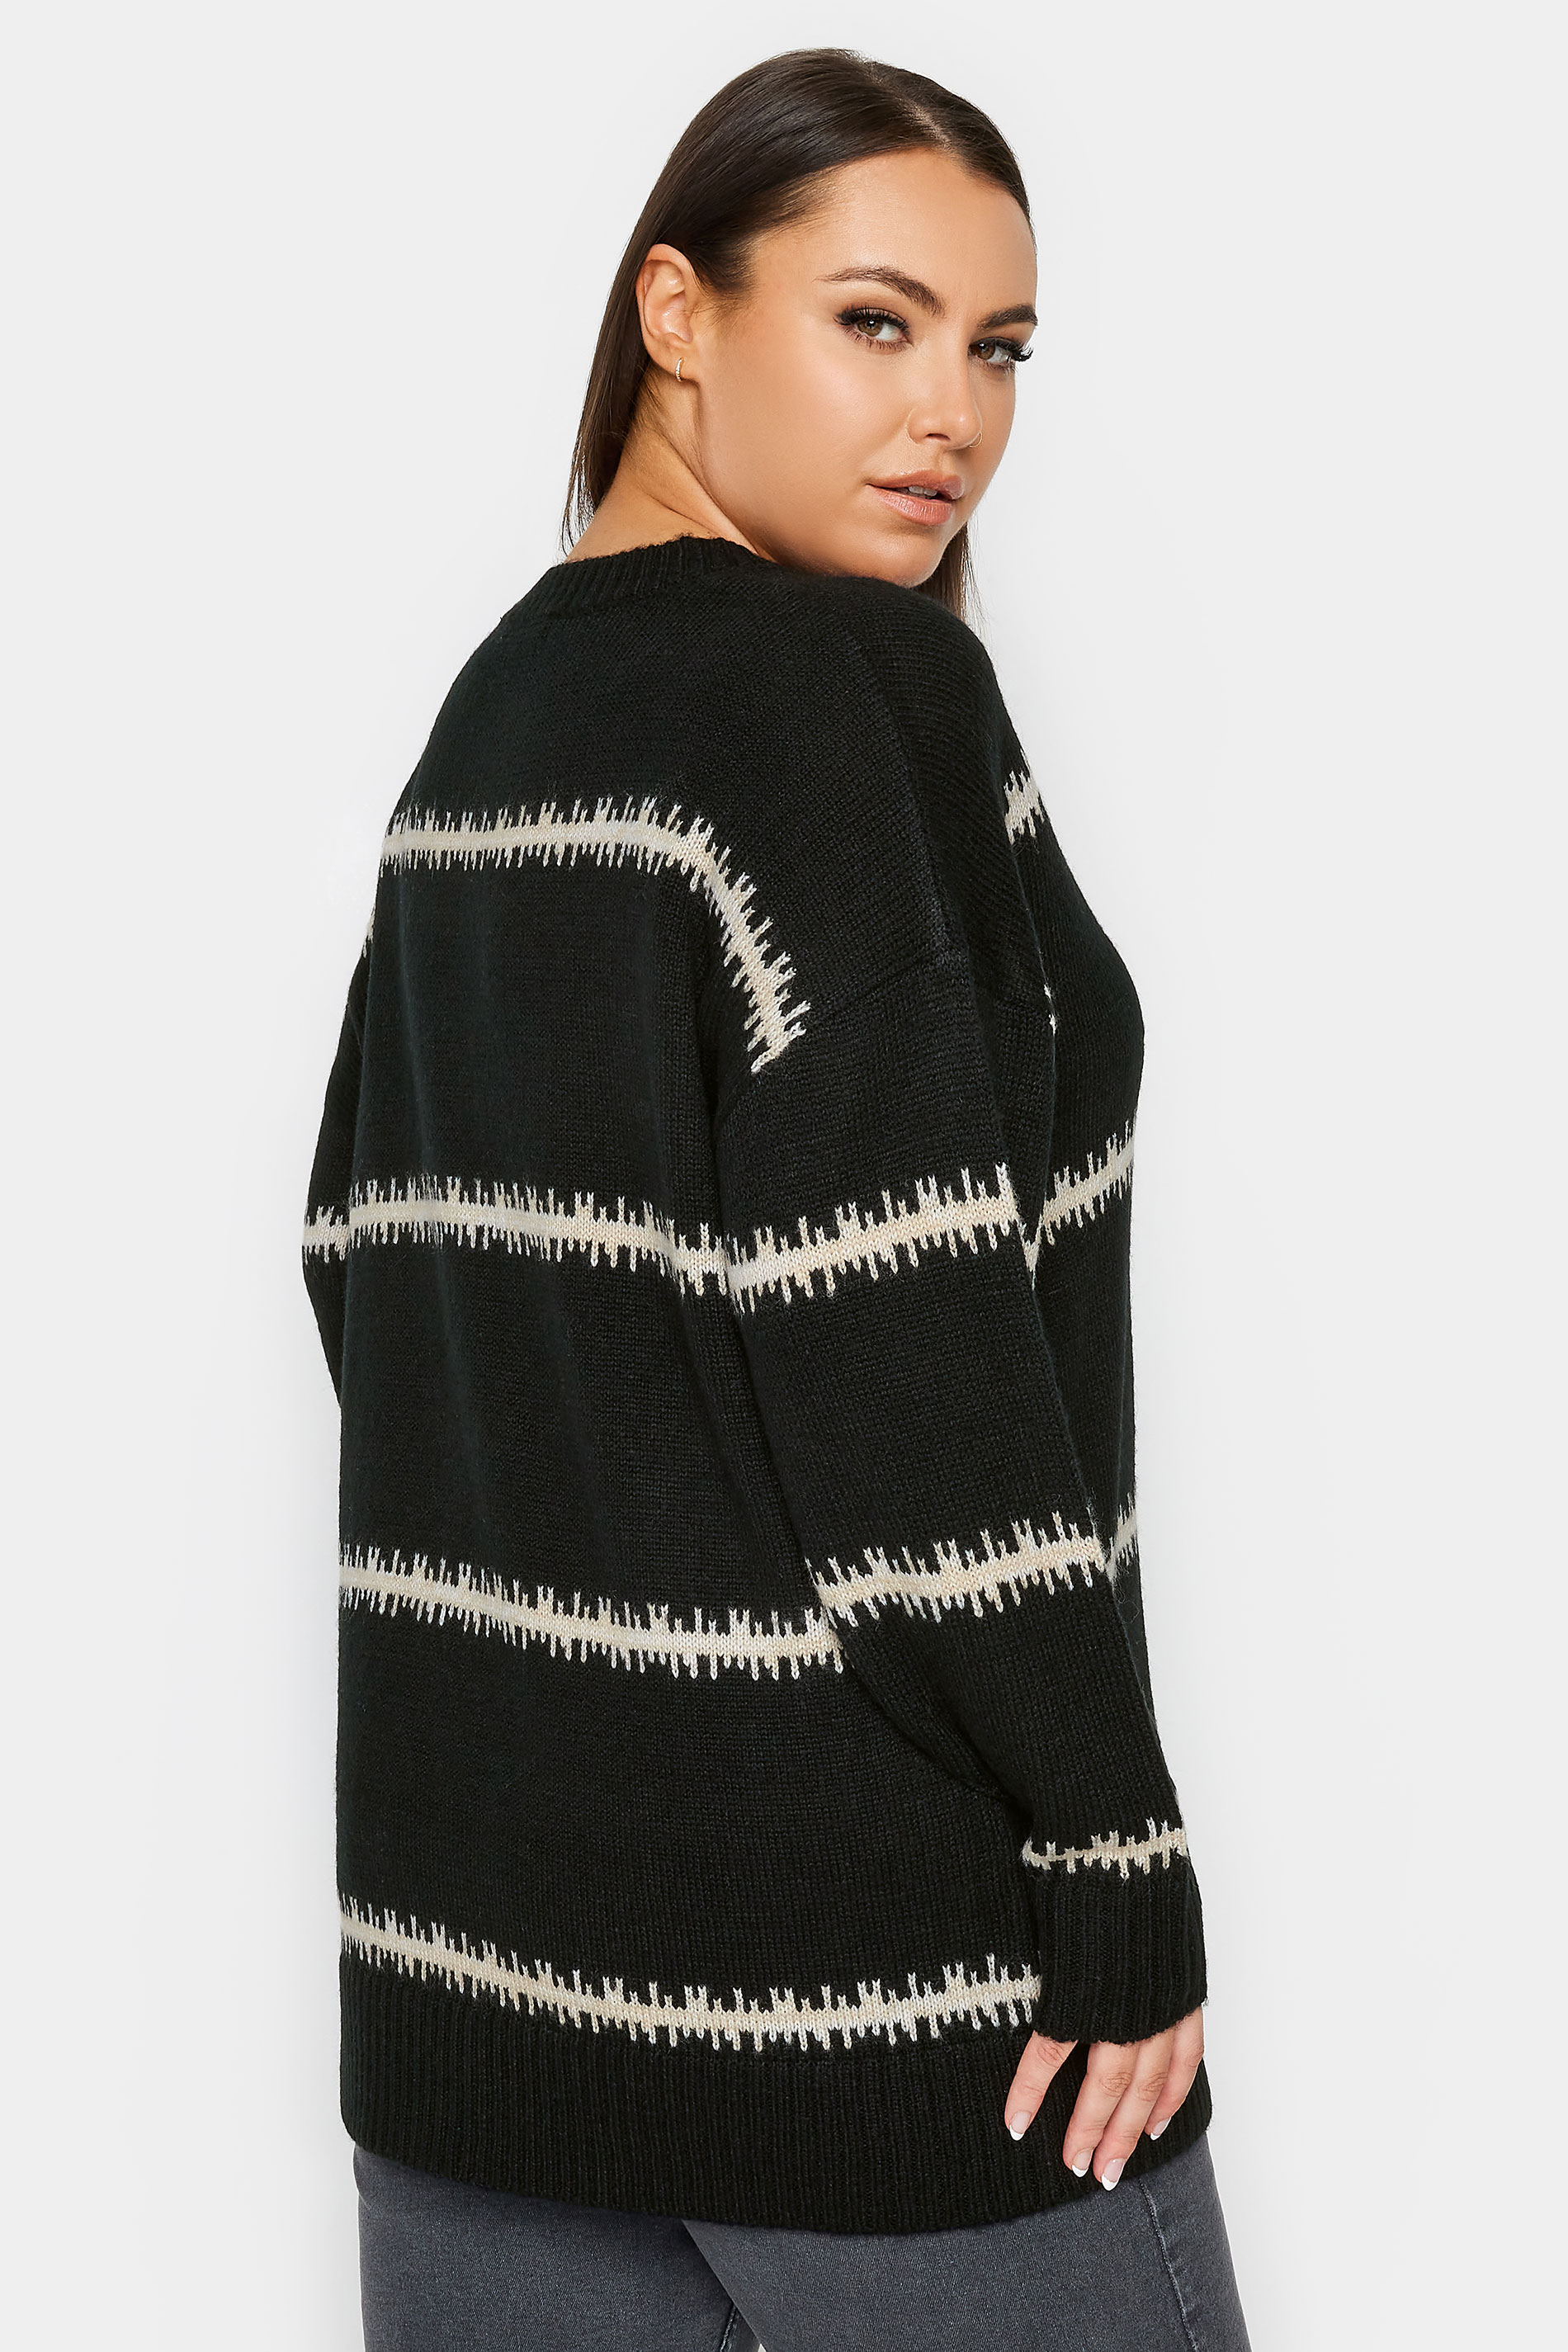 YOURS Plus Size Black Feathered Design Jumper | Yours Clothing 3